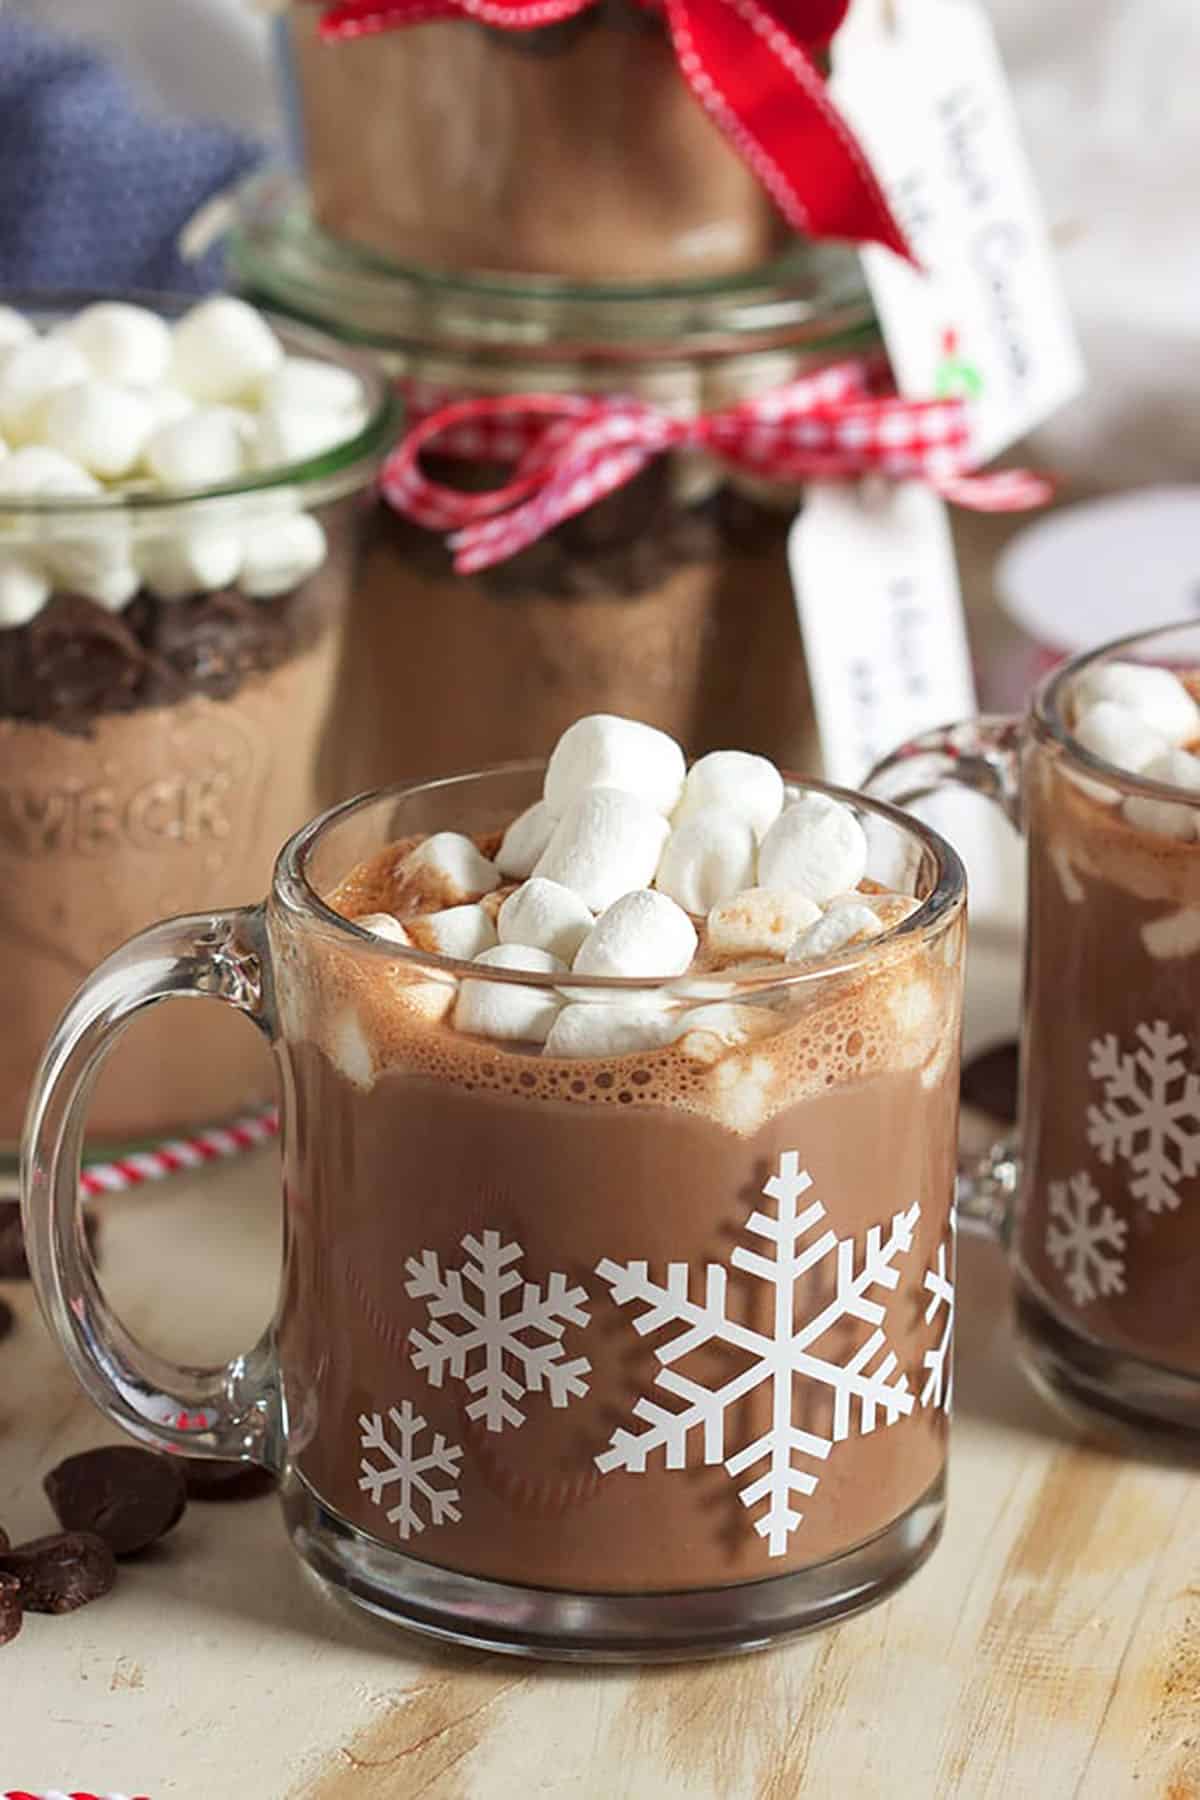 Hot chocolate with marshmallows on top in a glass mug on a wood background with a jar of cocoa mix in the background.